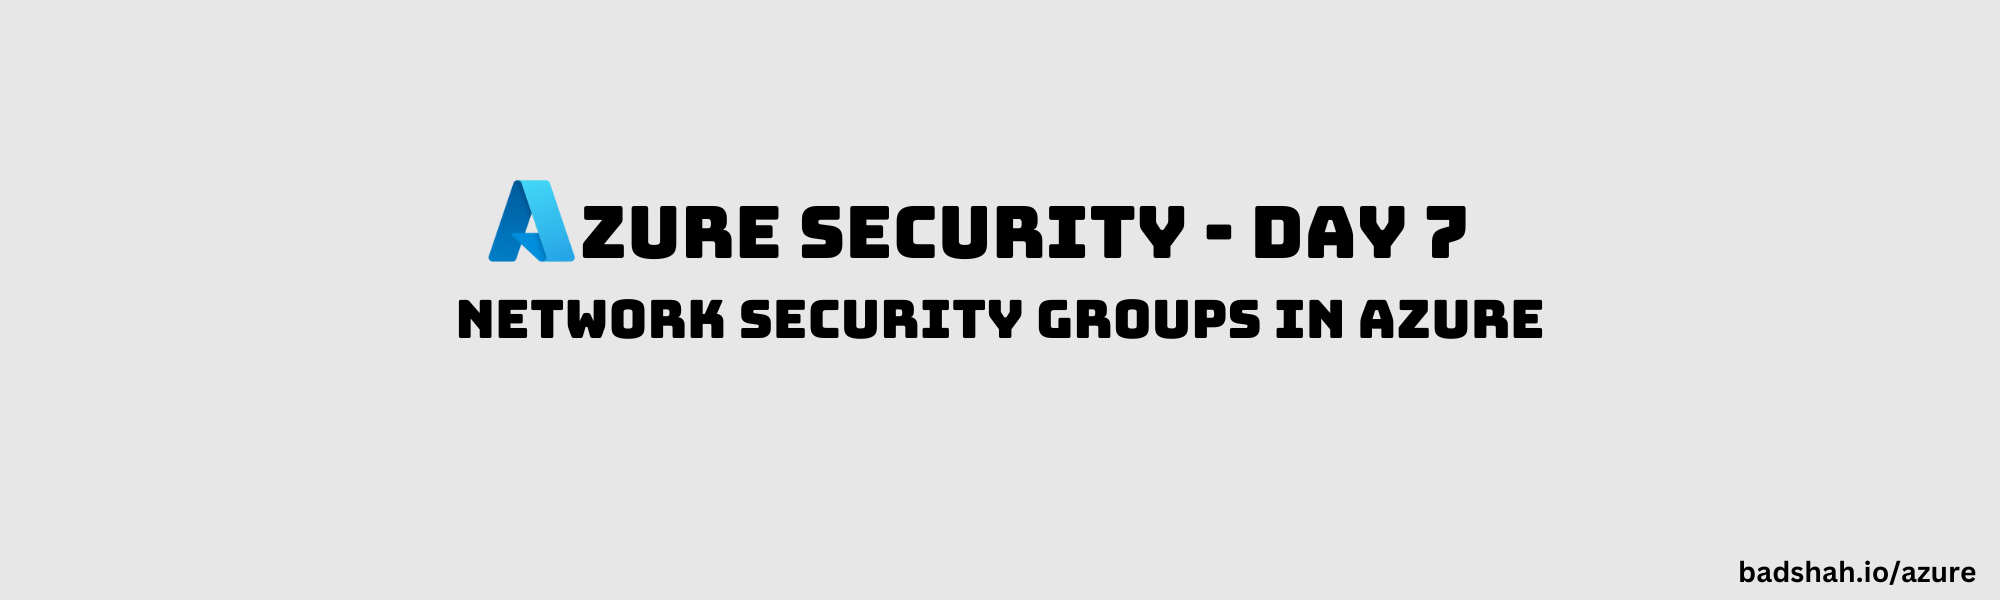 /azure/network-security-groups/cover-image.png